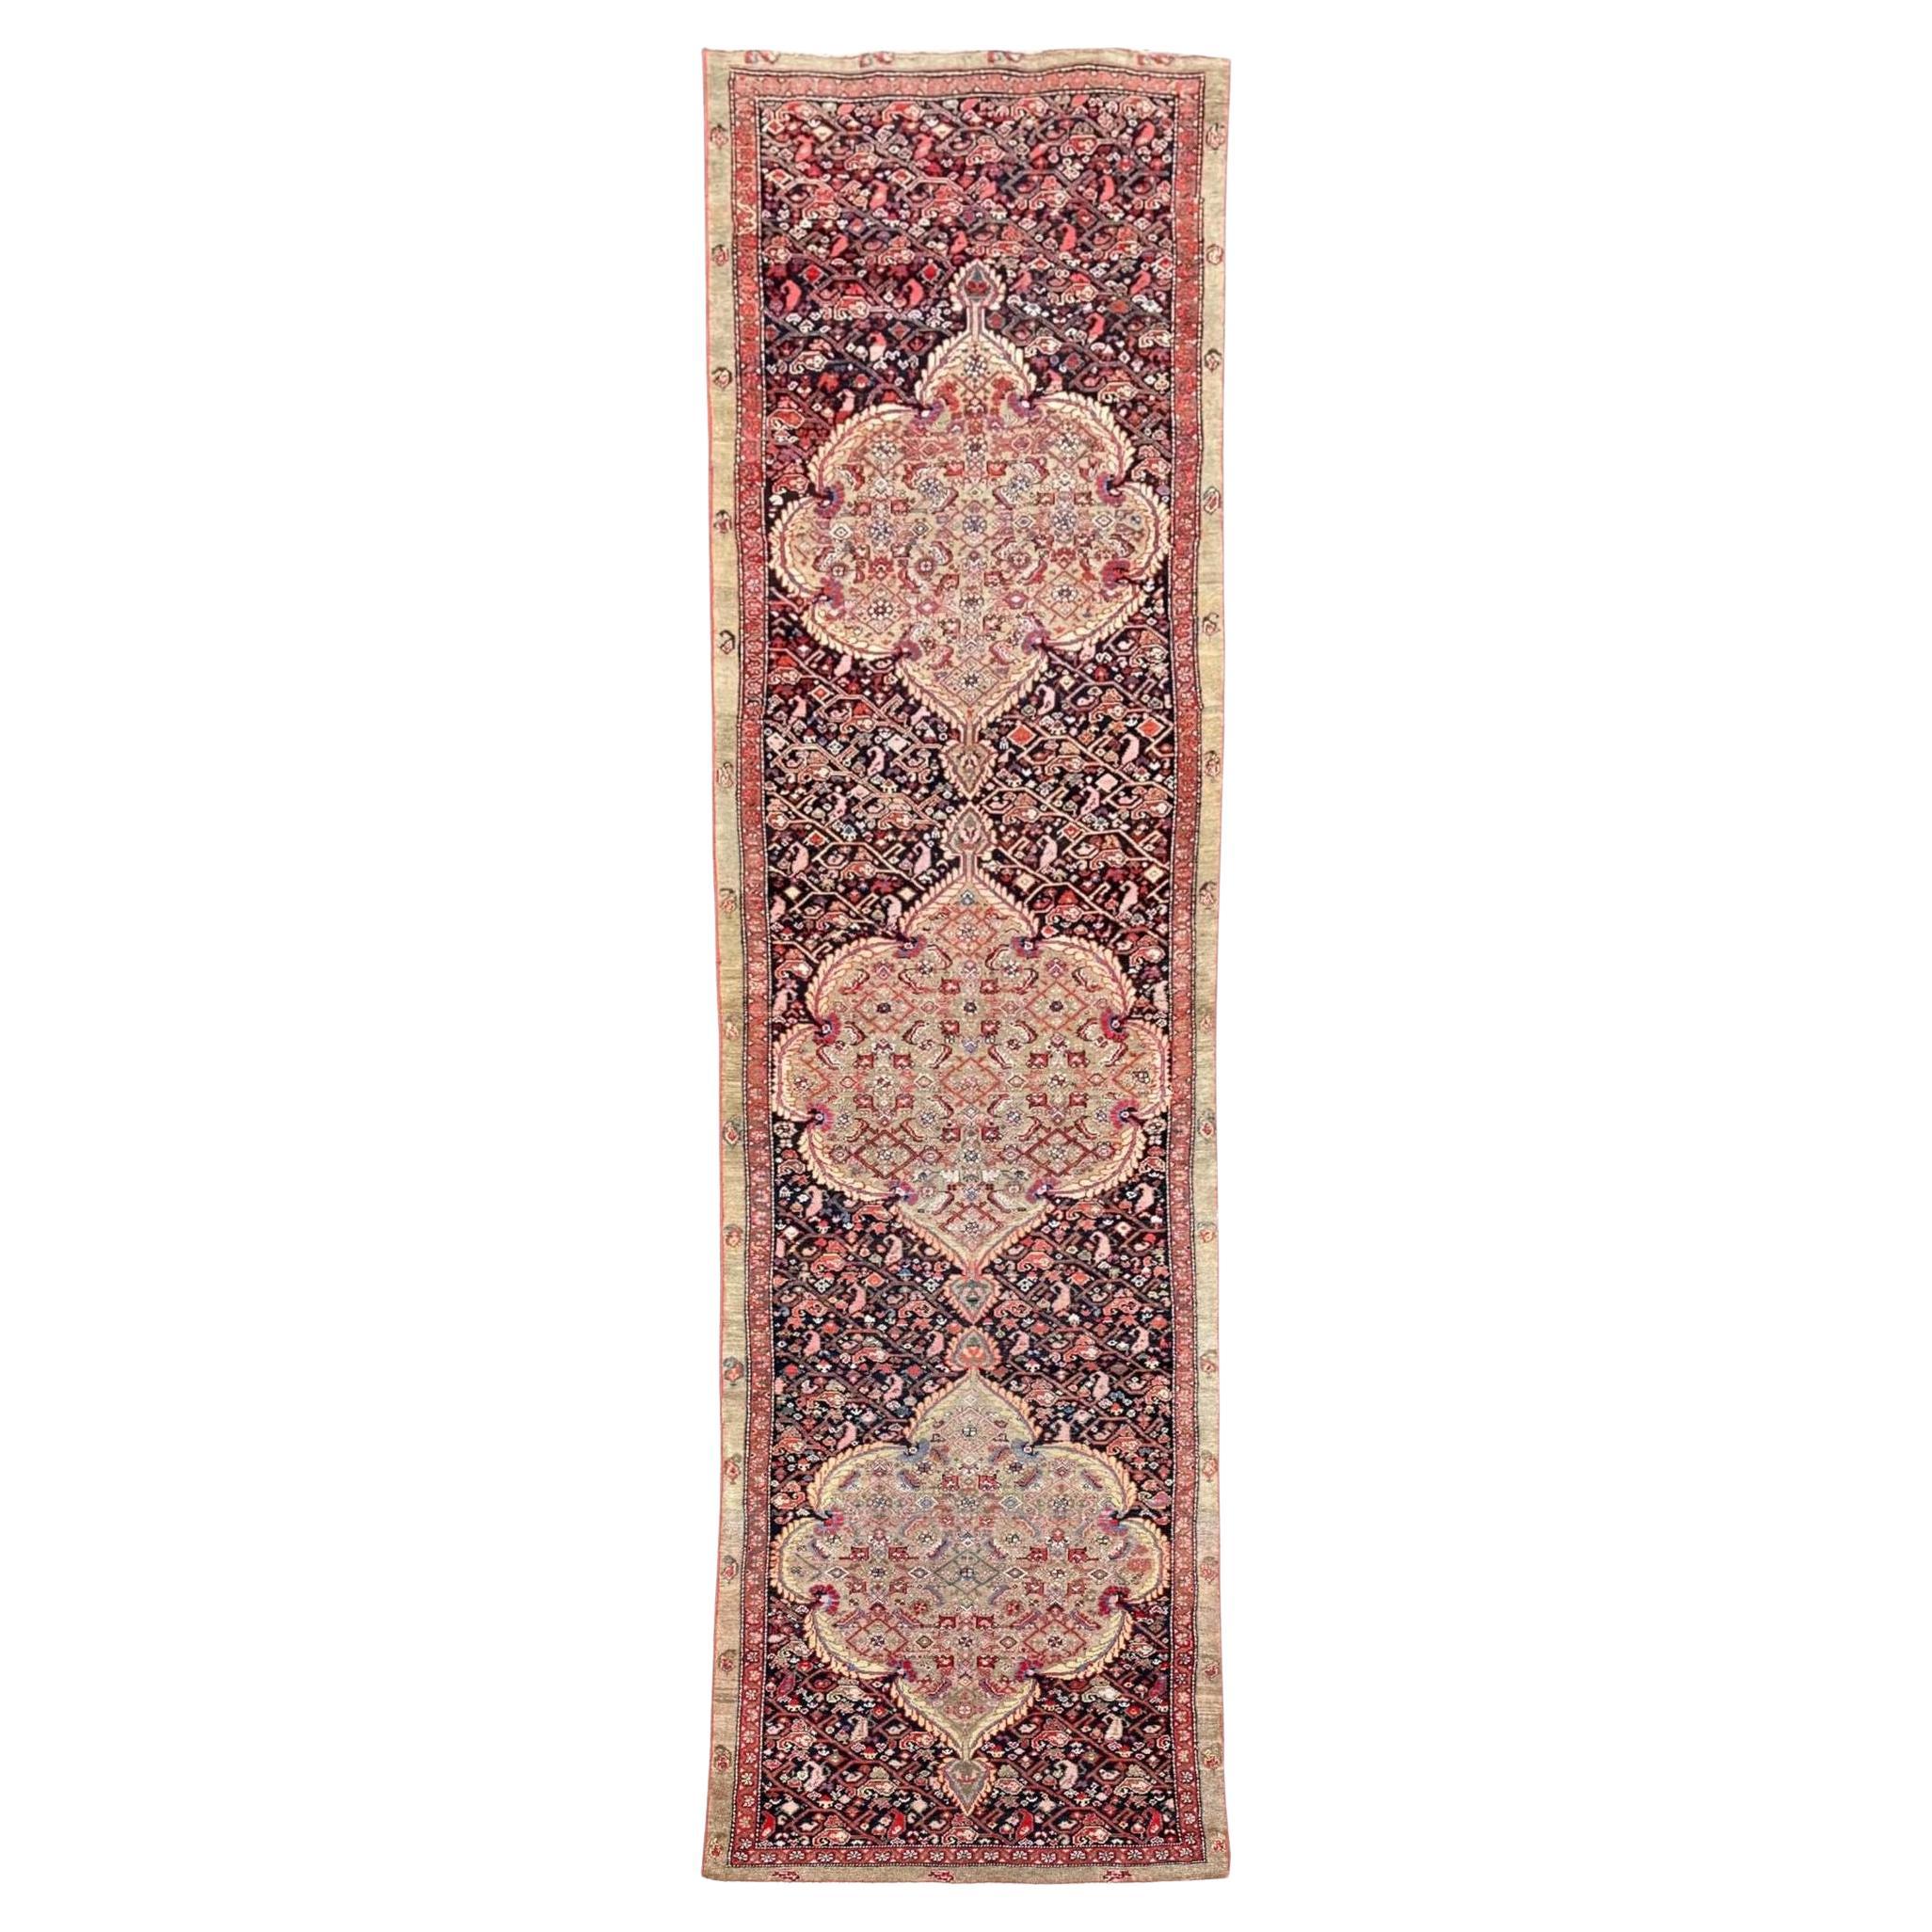 Antique Malayer Runner 4.25m x 0.96m For Sale